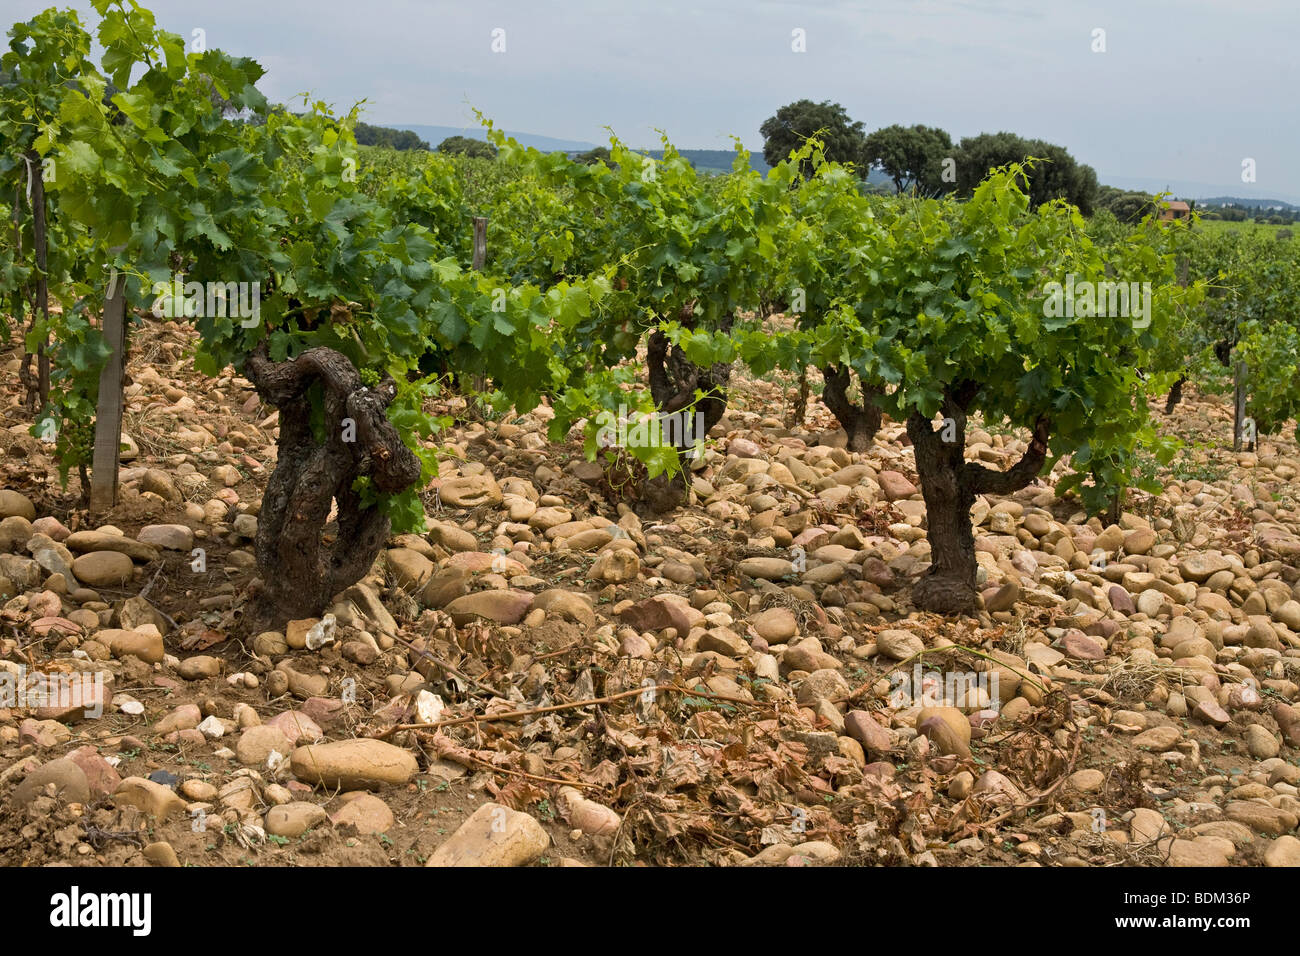 30 year old Grape Vines at a vineyard in Chateauneuf Du-Pape, France, showing the stoney soil that these grapes grow on Stock Photo